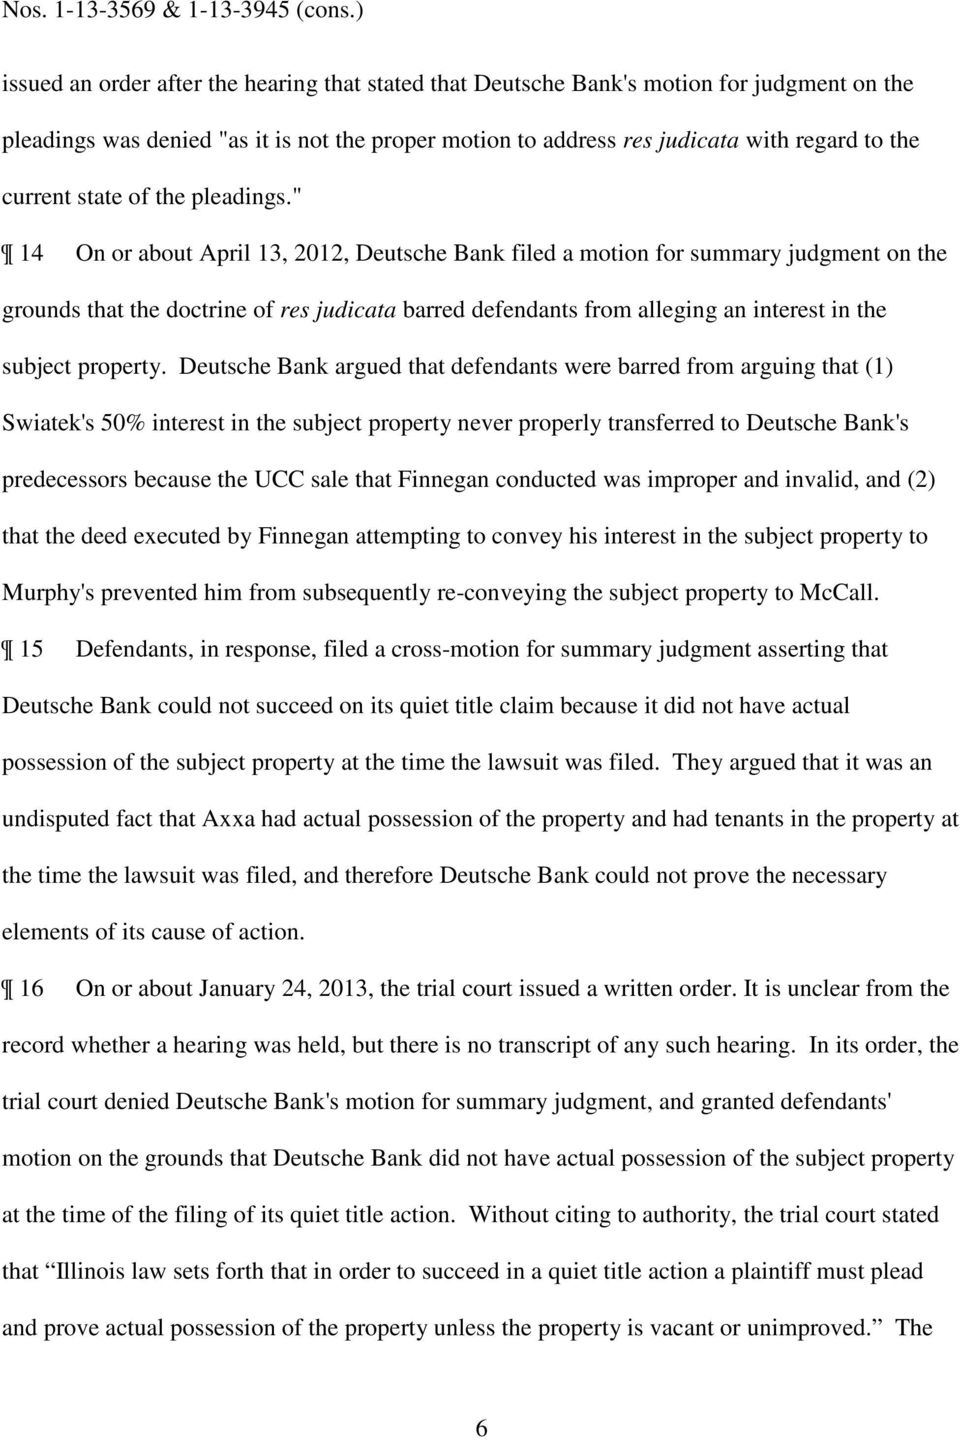 " 14 On or about April 13, 2012, Deutsche Bank filed a motion for summary judgment on the grounds that the doctrine of res judicata barred defendants from alleging an interest in the subject property.